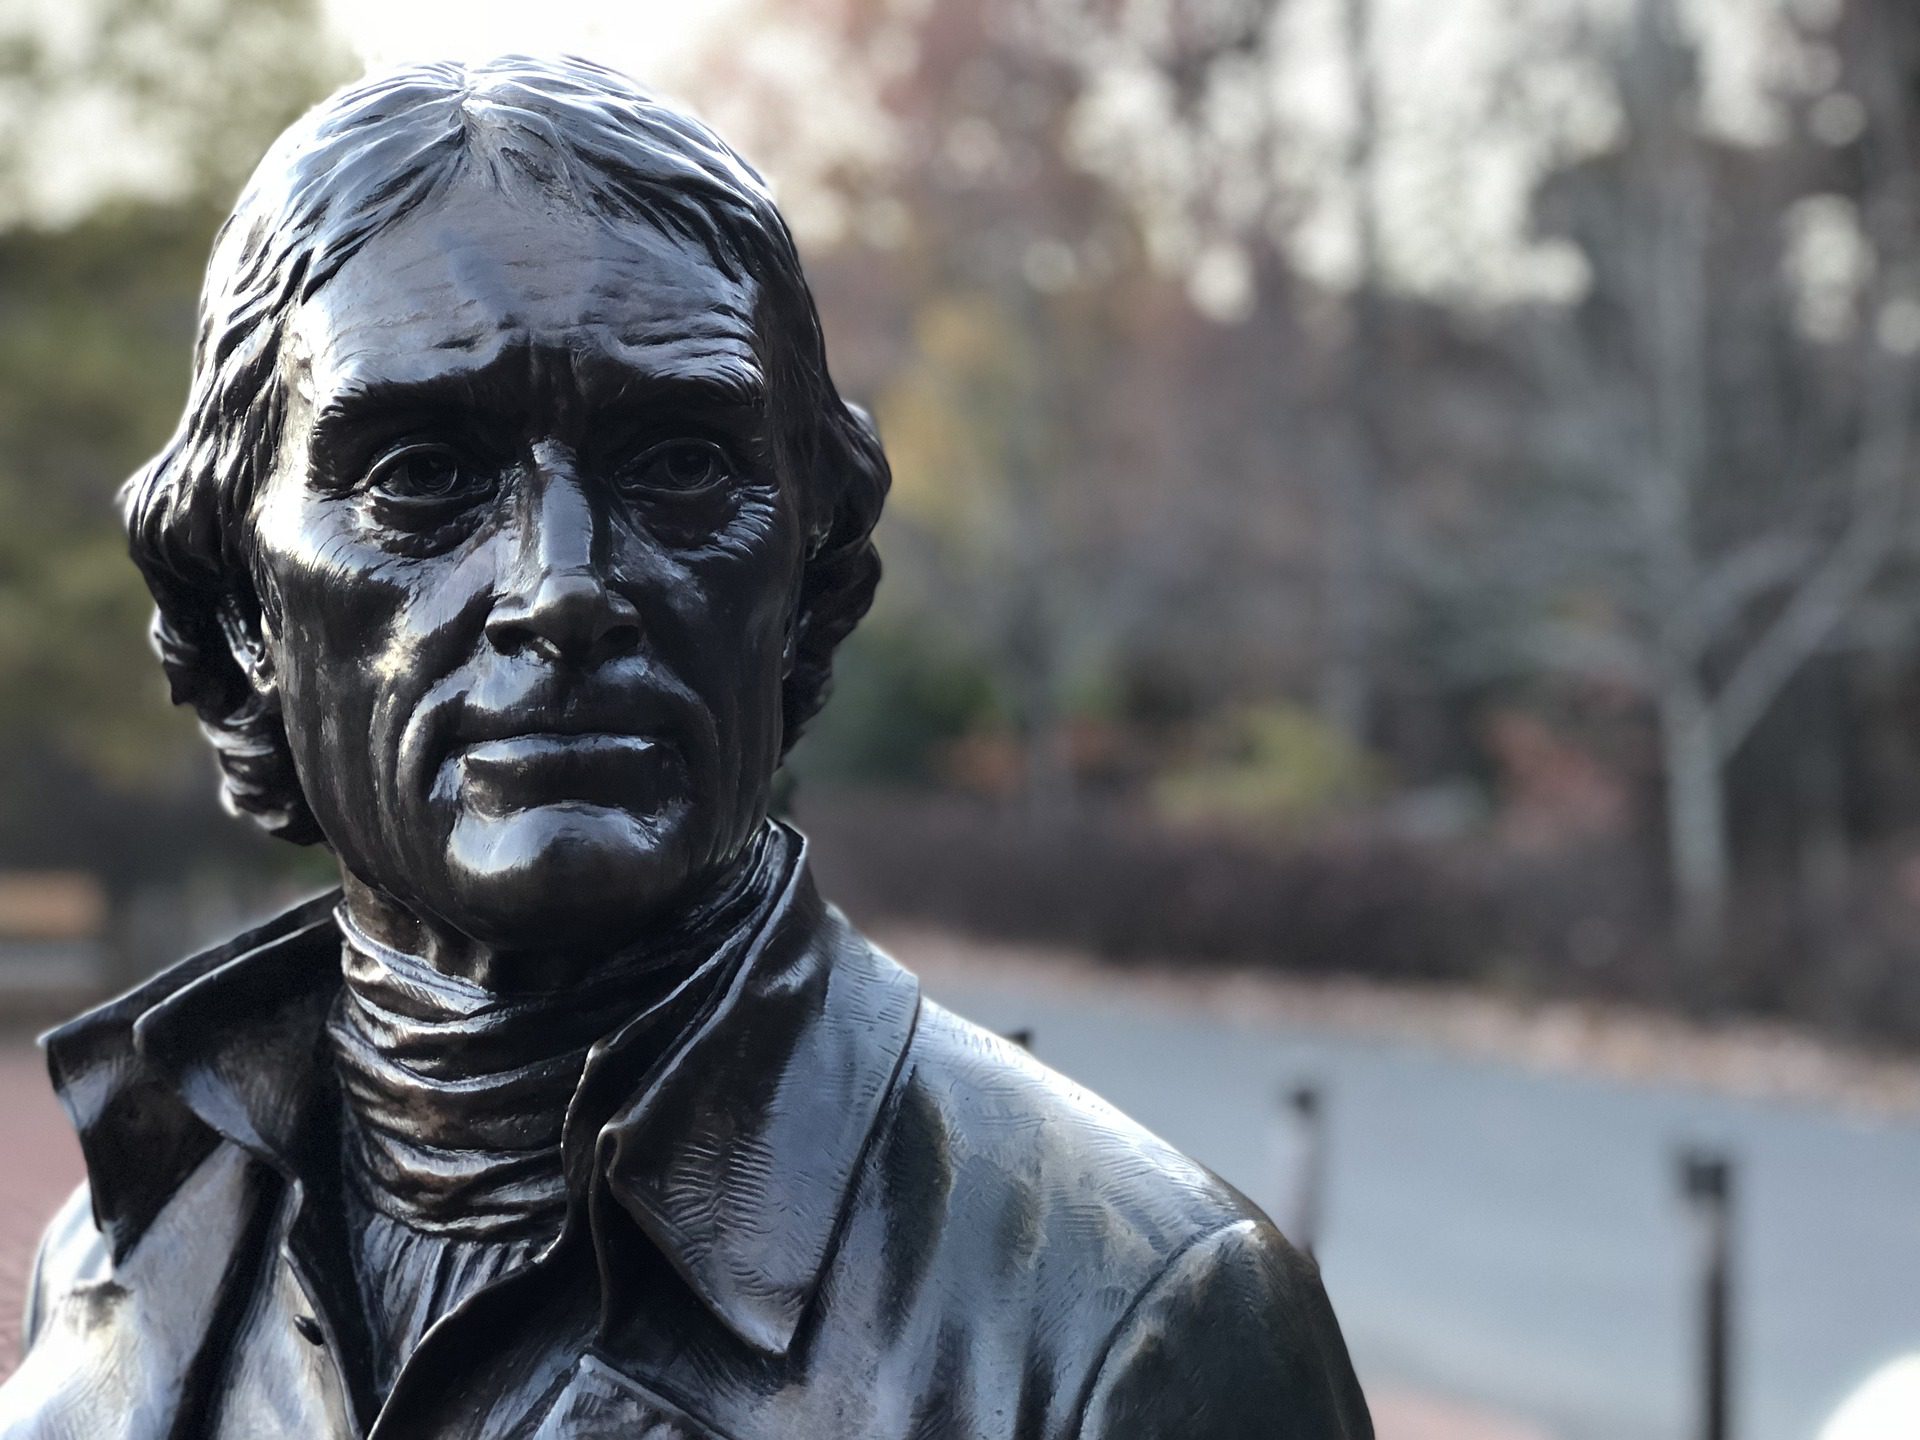 Thomas Jefferson: The paradoxical Founding Father who left an imprint on Long Island | TBR News Media